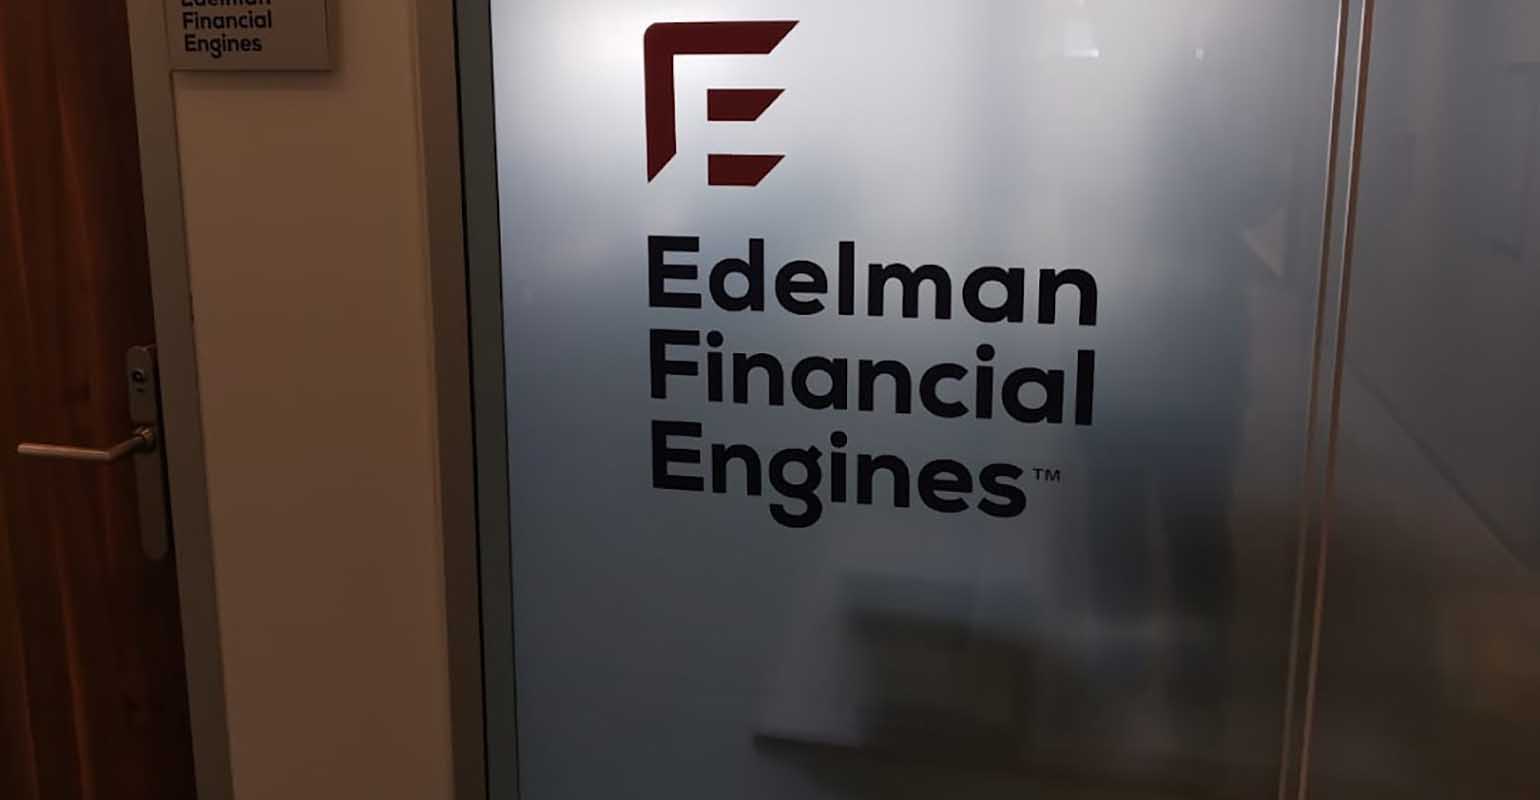 Edelman Financial Engines Launches New Workplace Platform